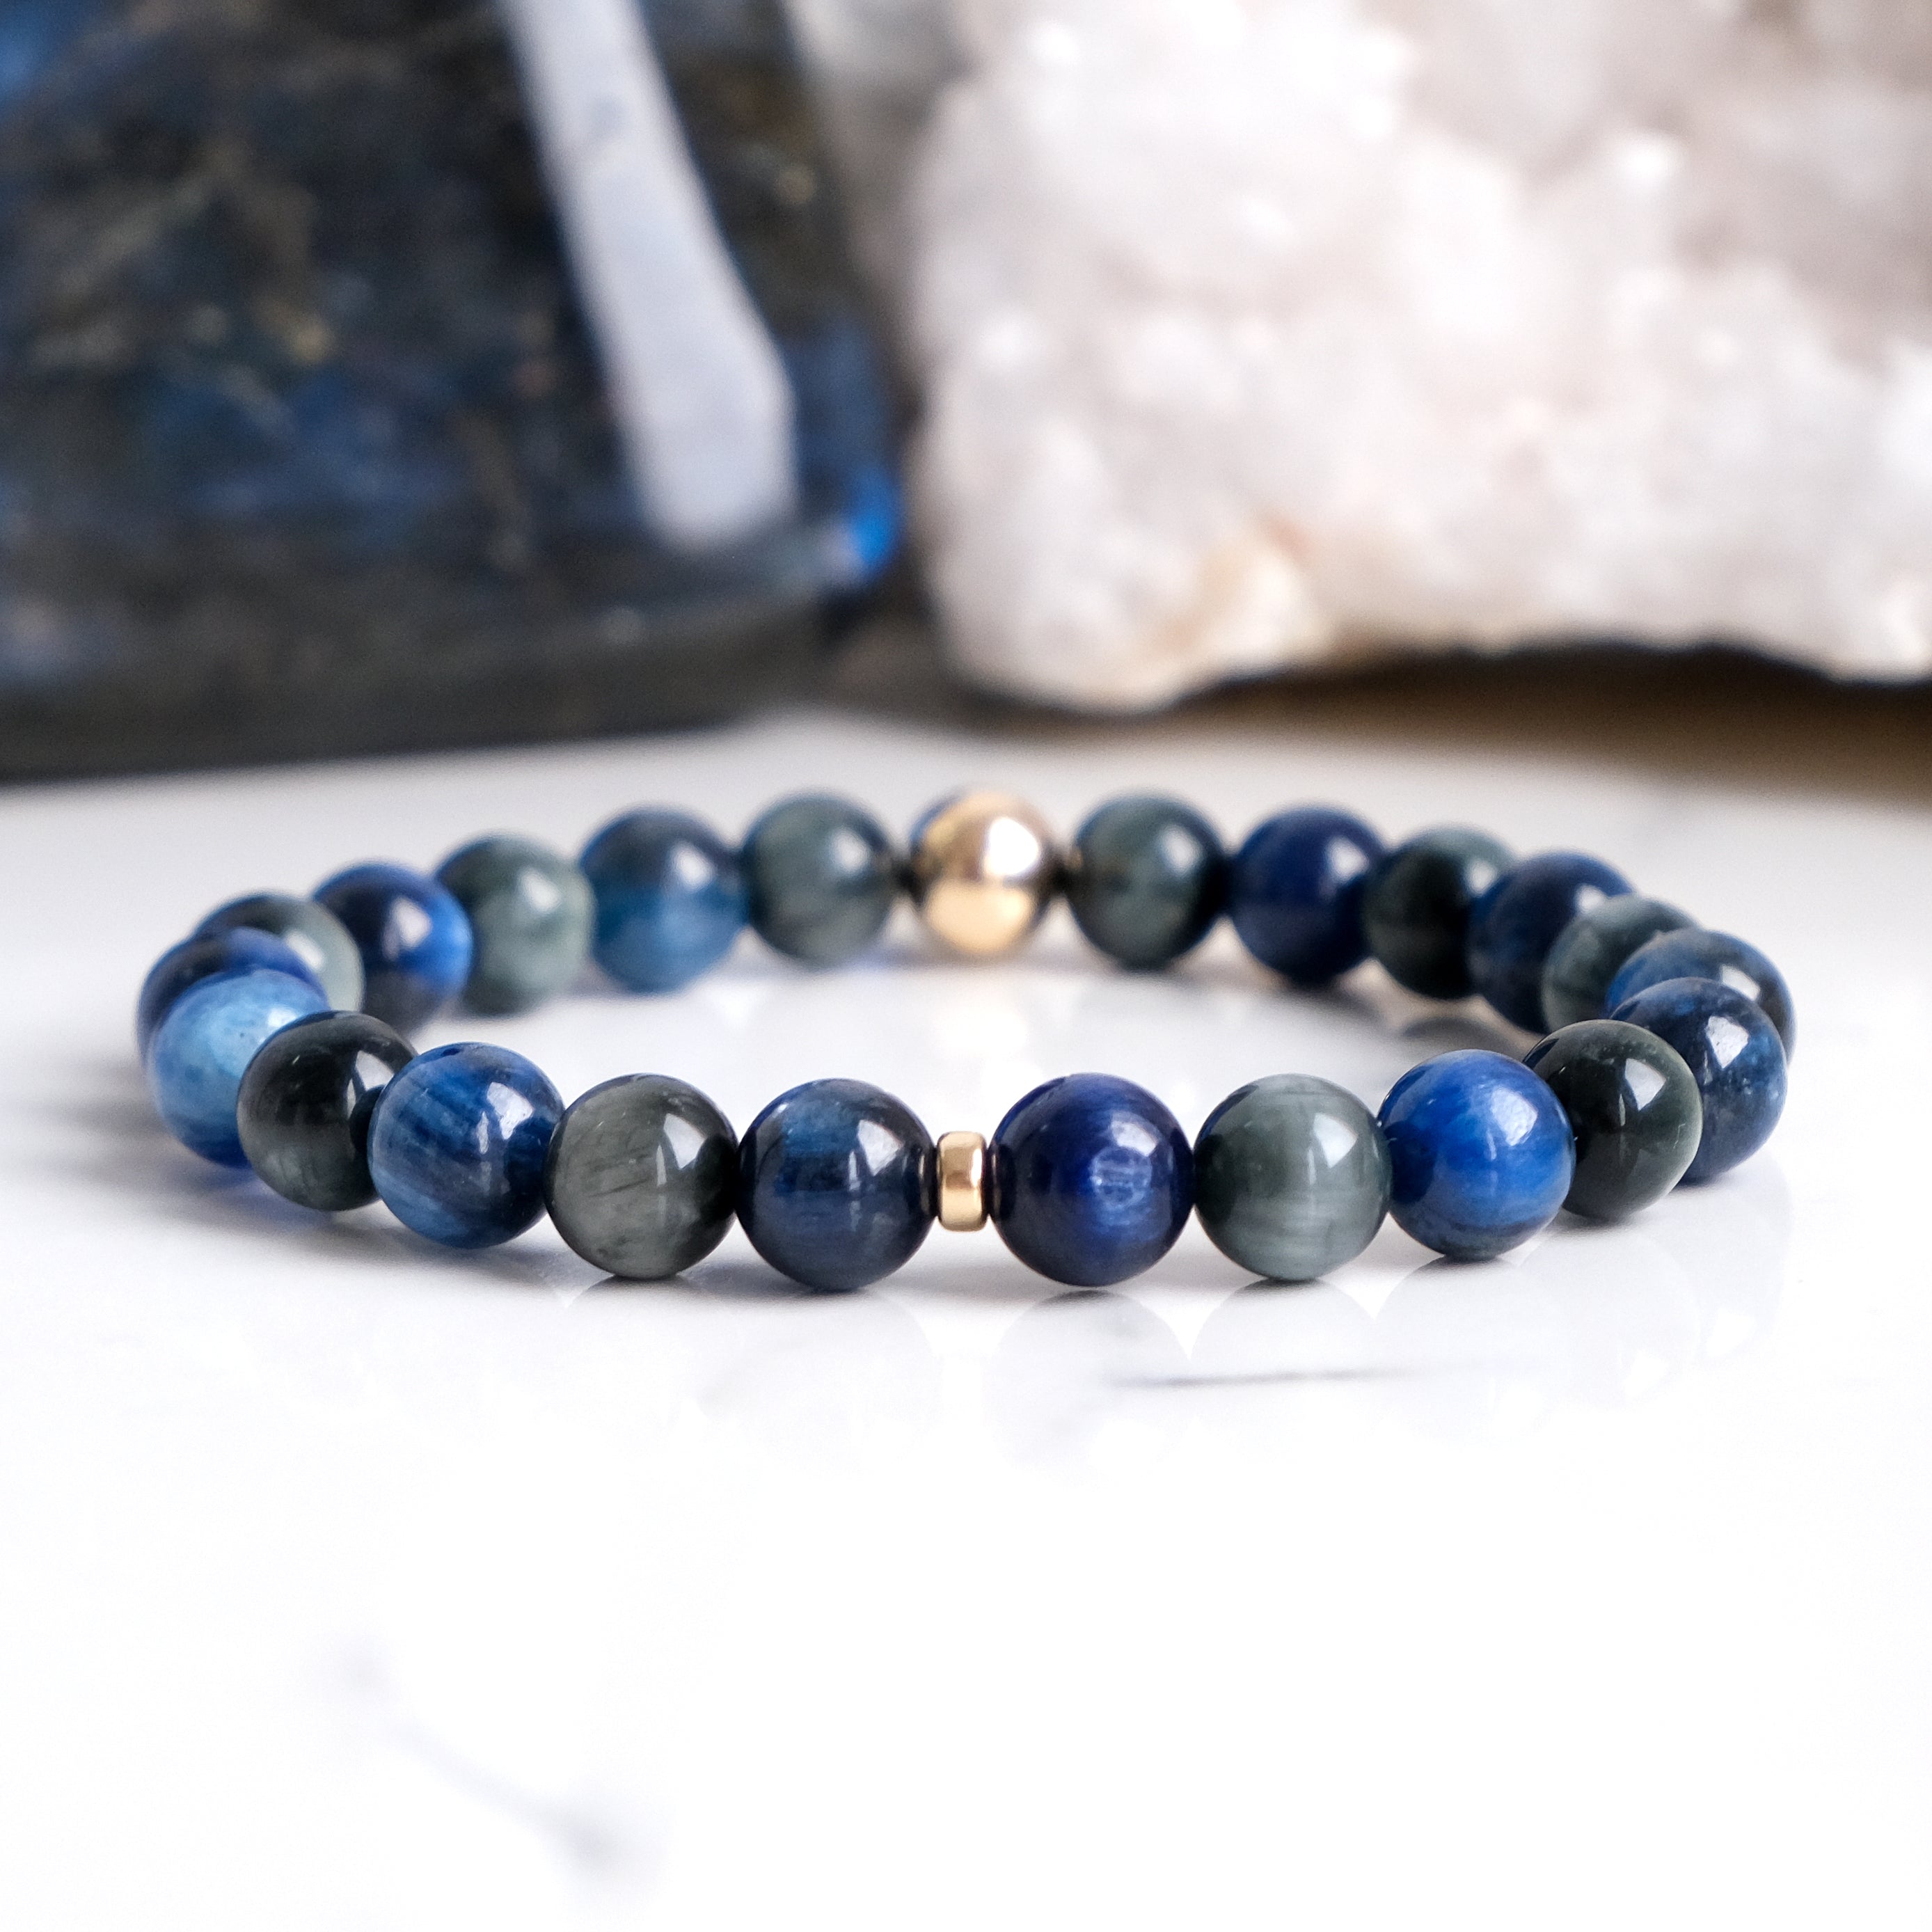 Kyanite and eagle eye gemstone bracelet with gold filled accessories